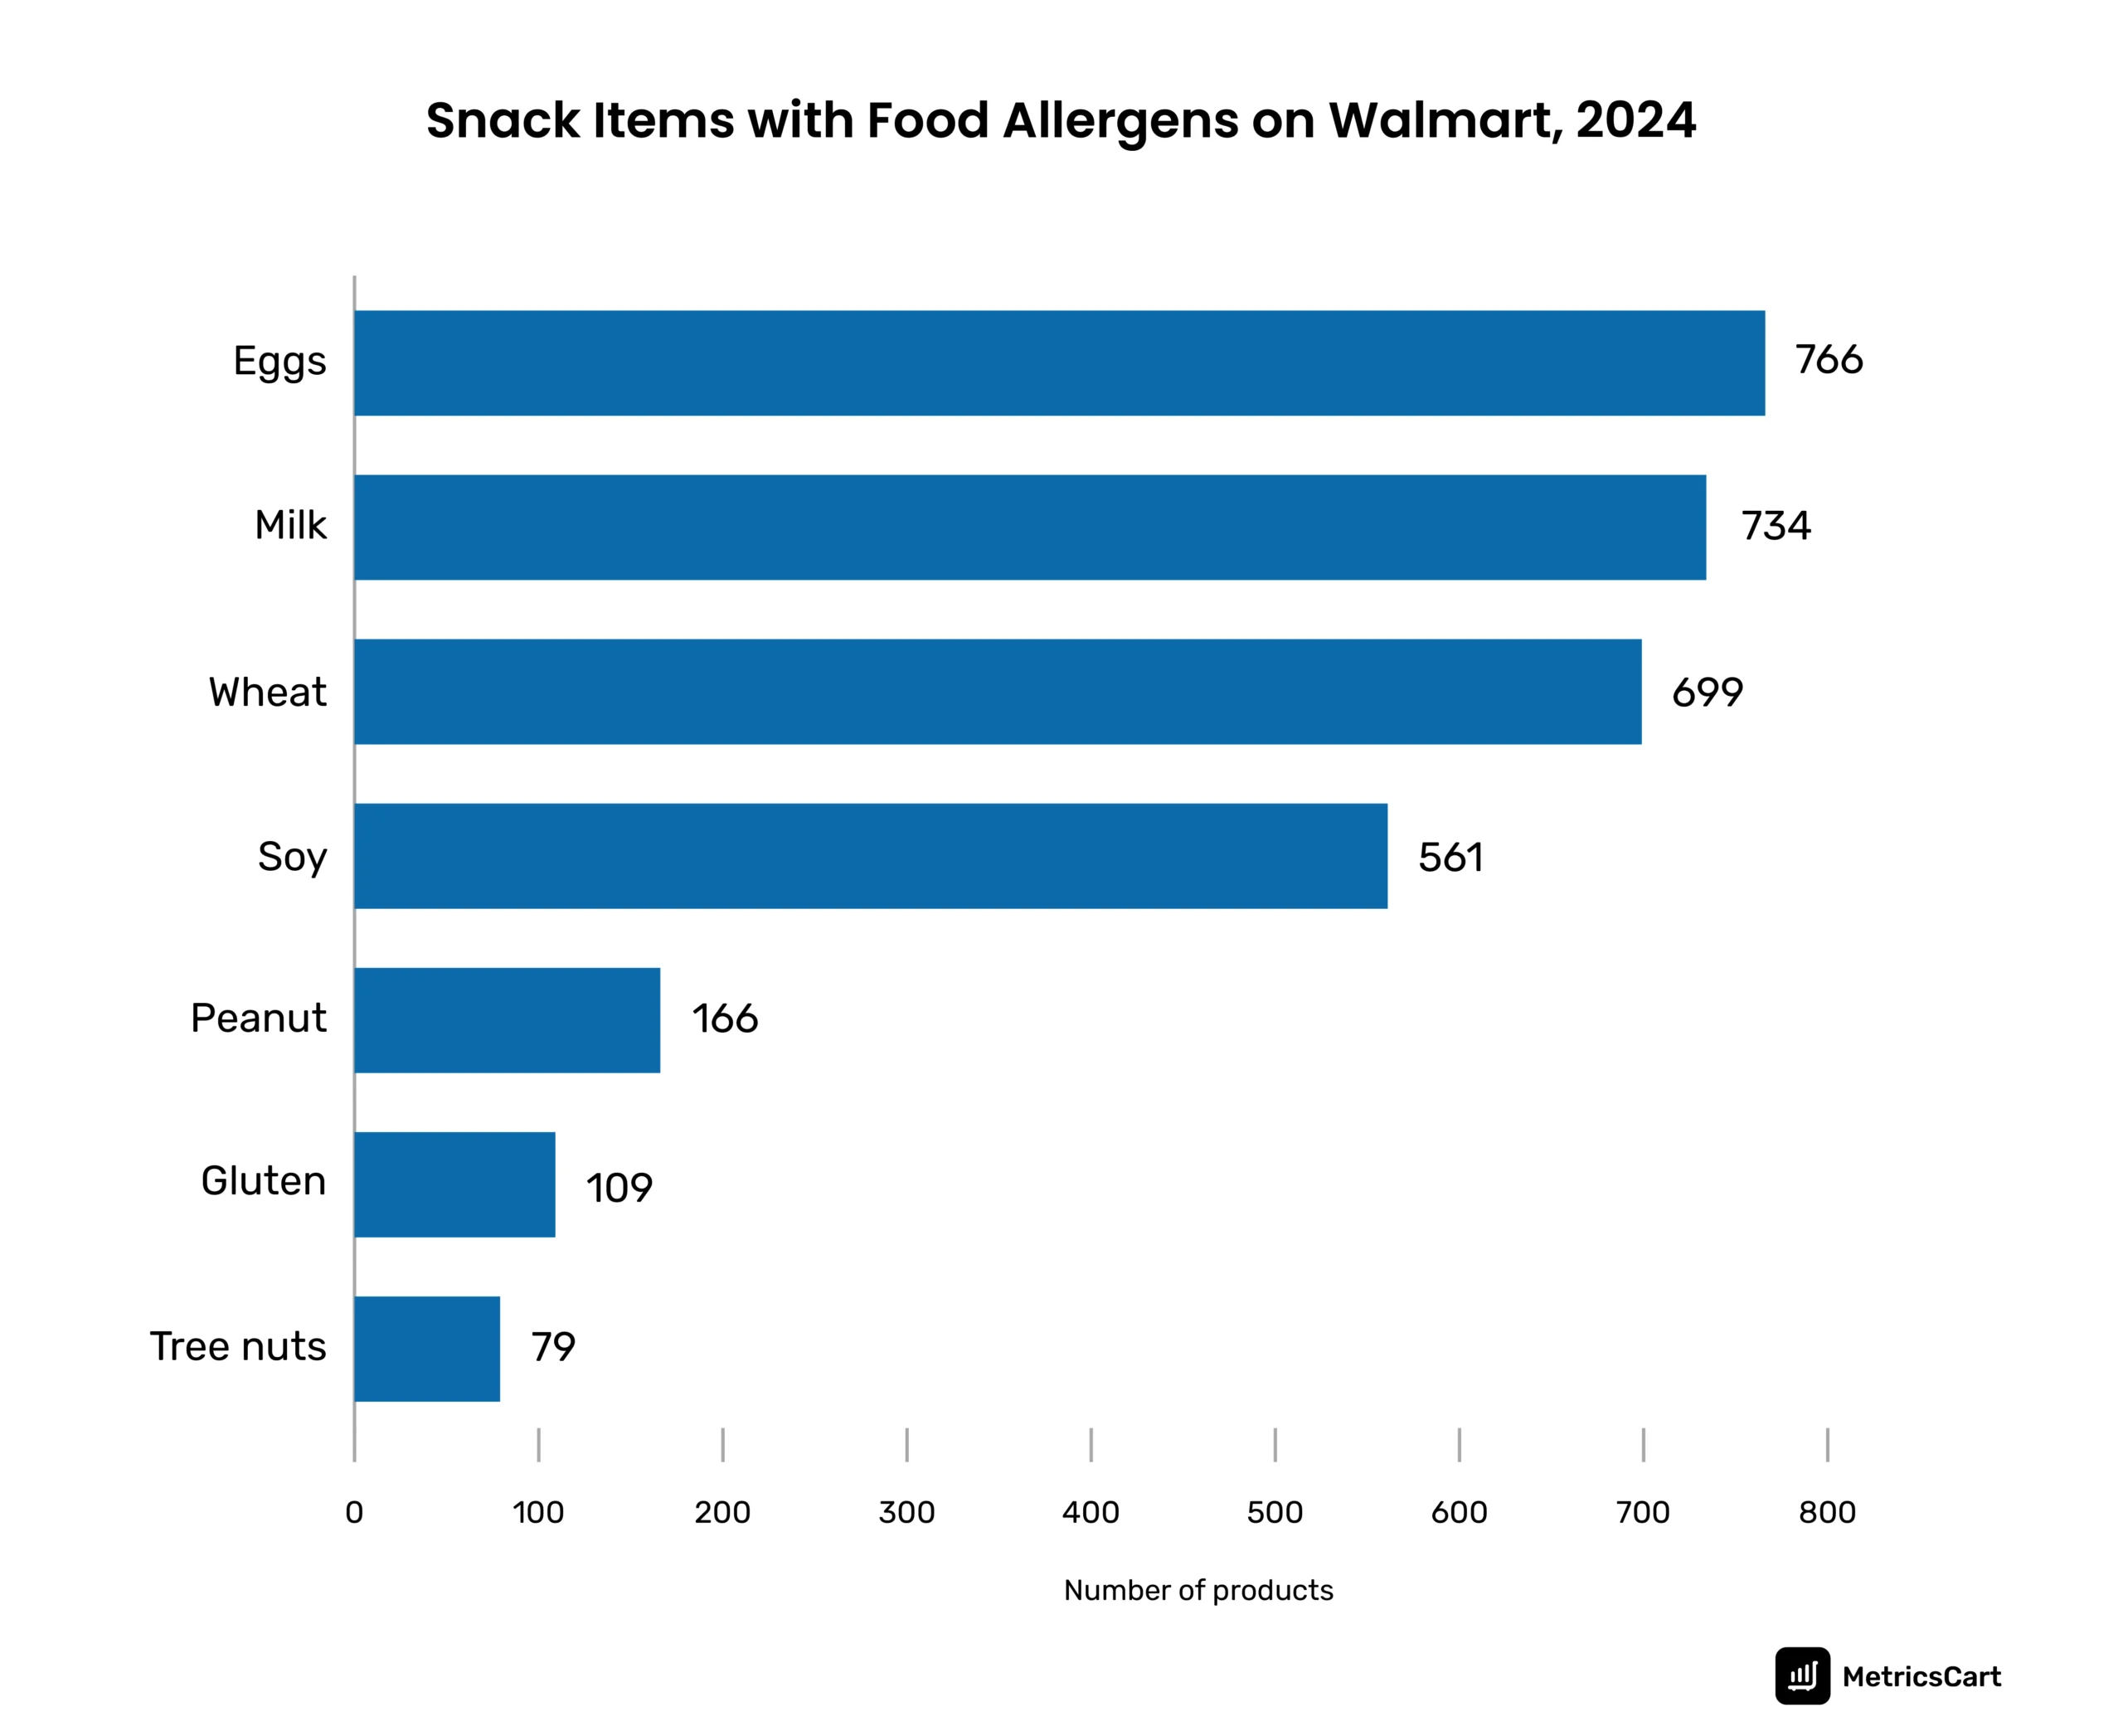 Bar chart displaying the total number of snack items with common food allergens at Walmart in 2024.